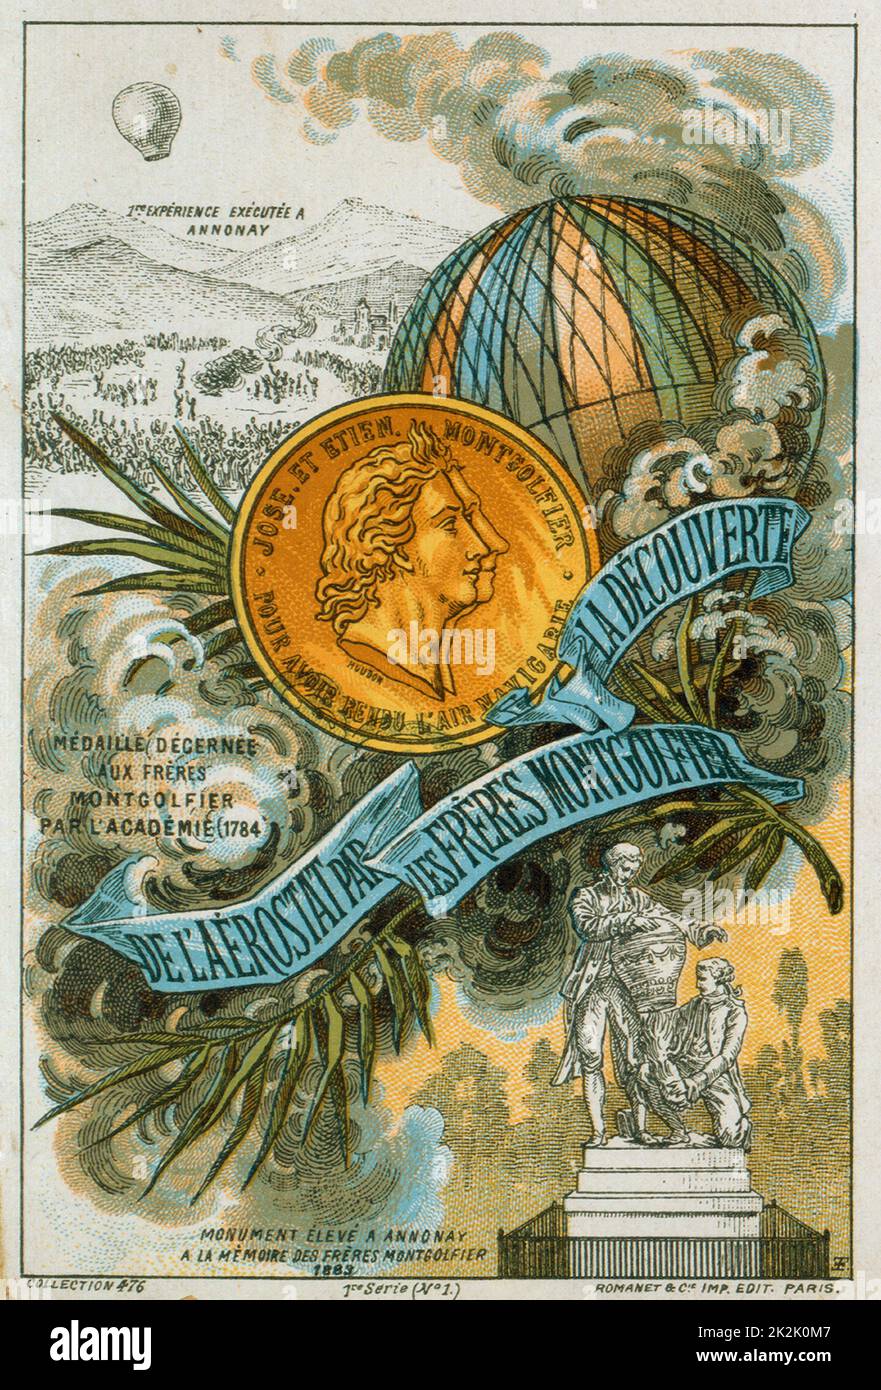 Crowds cheering at the first public demonstration of a hot air balloon at Annonay France, 4 June 1783, by the Montgolfier brothers. Collecting card celebrating centenary of their invention. Flying Aeronautics Aviation Ballooning Stock Photo